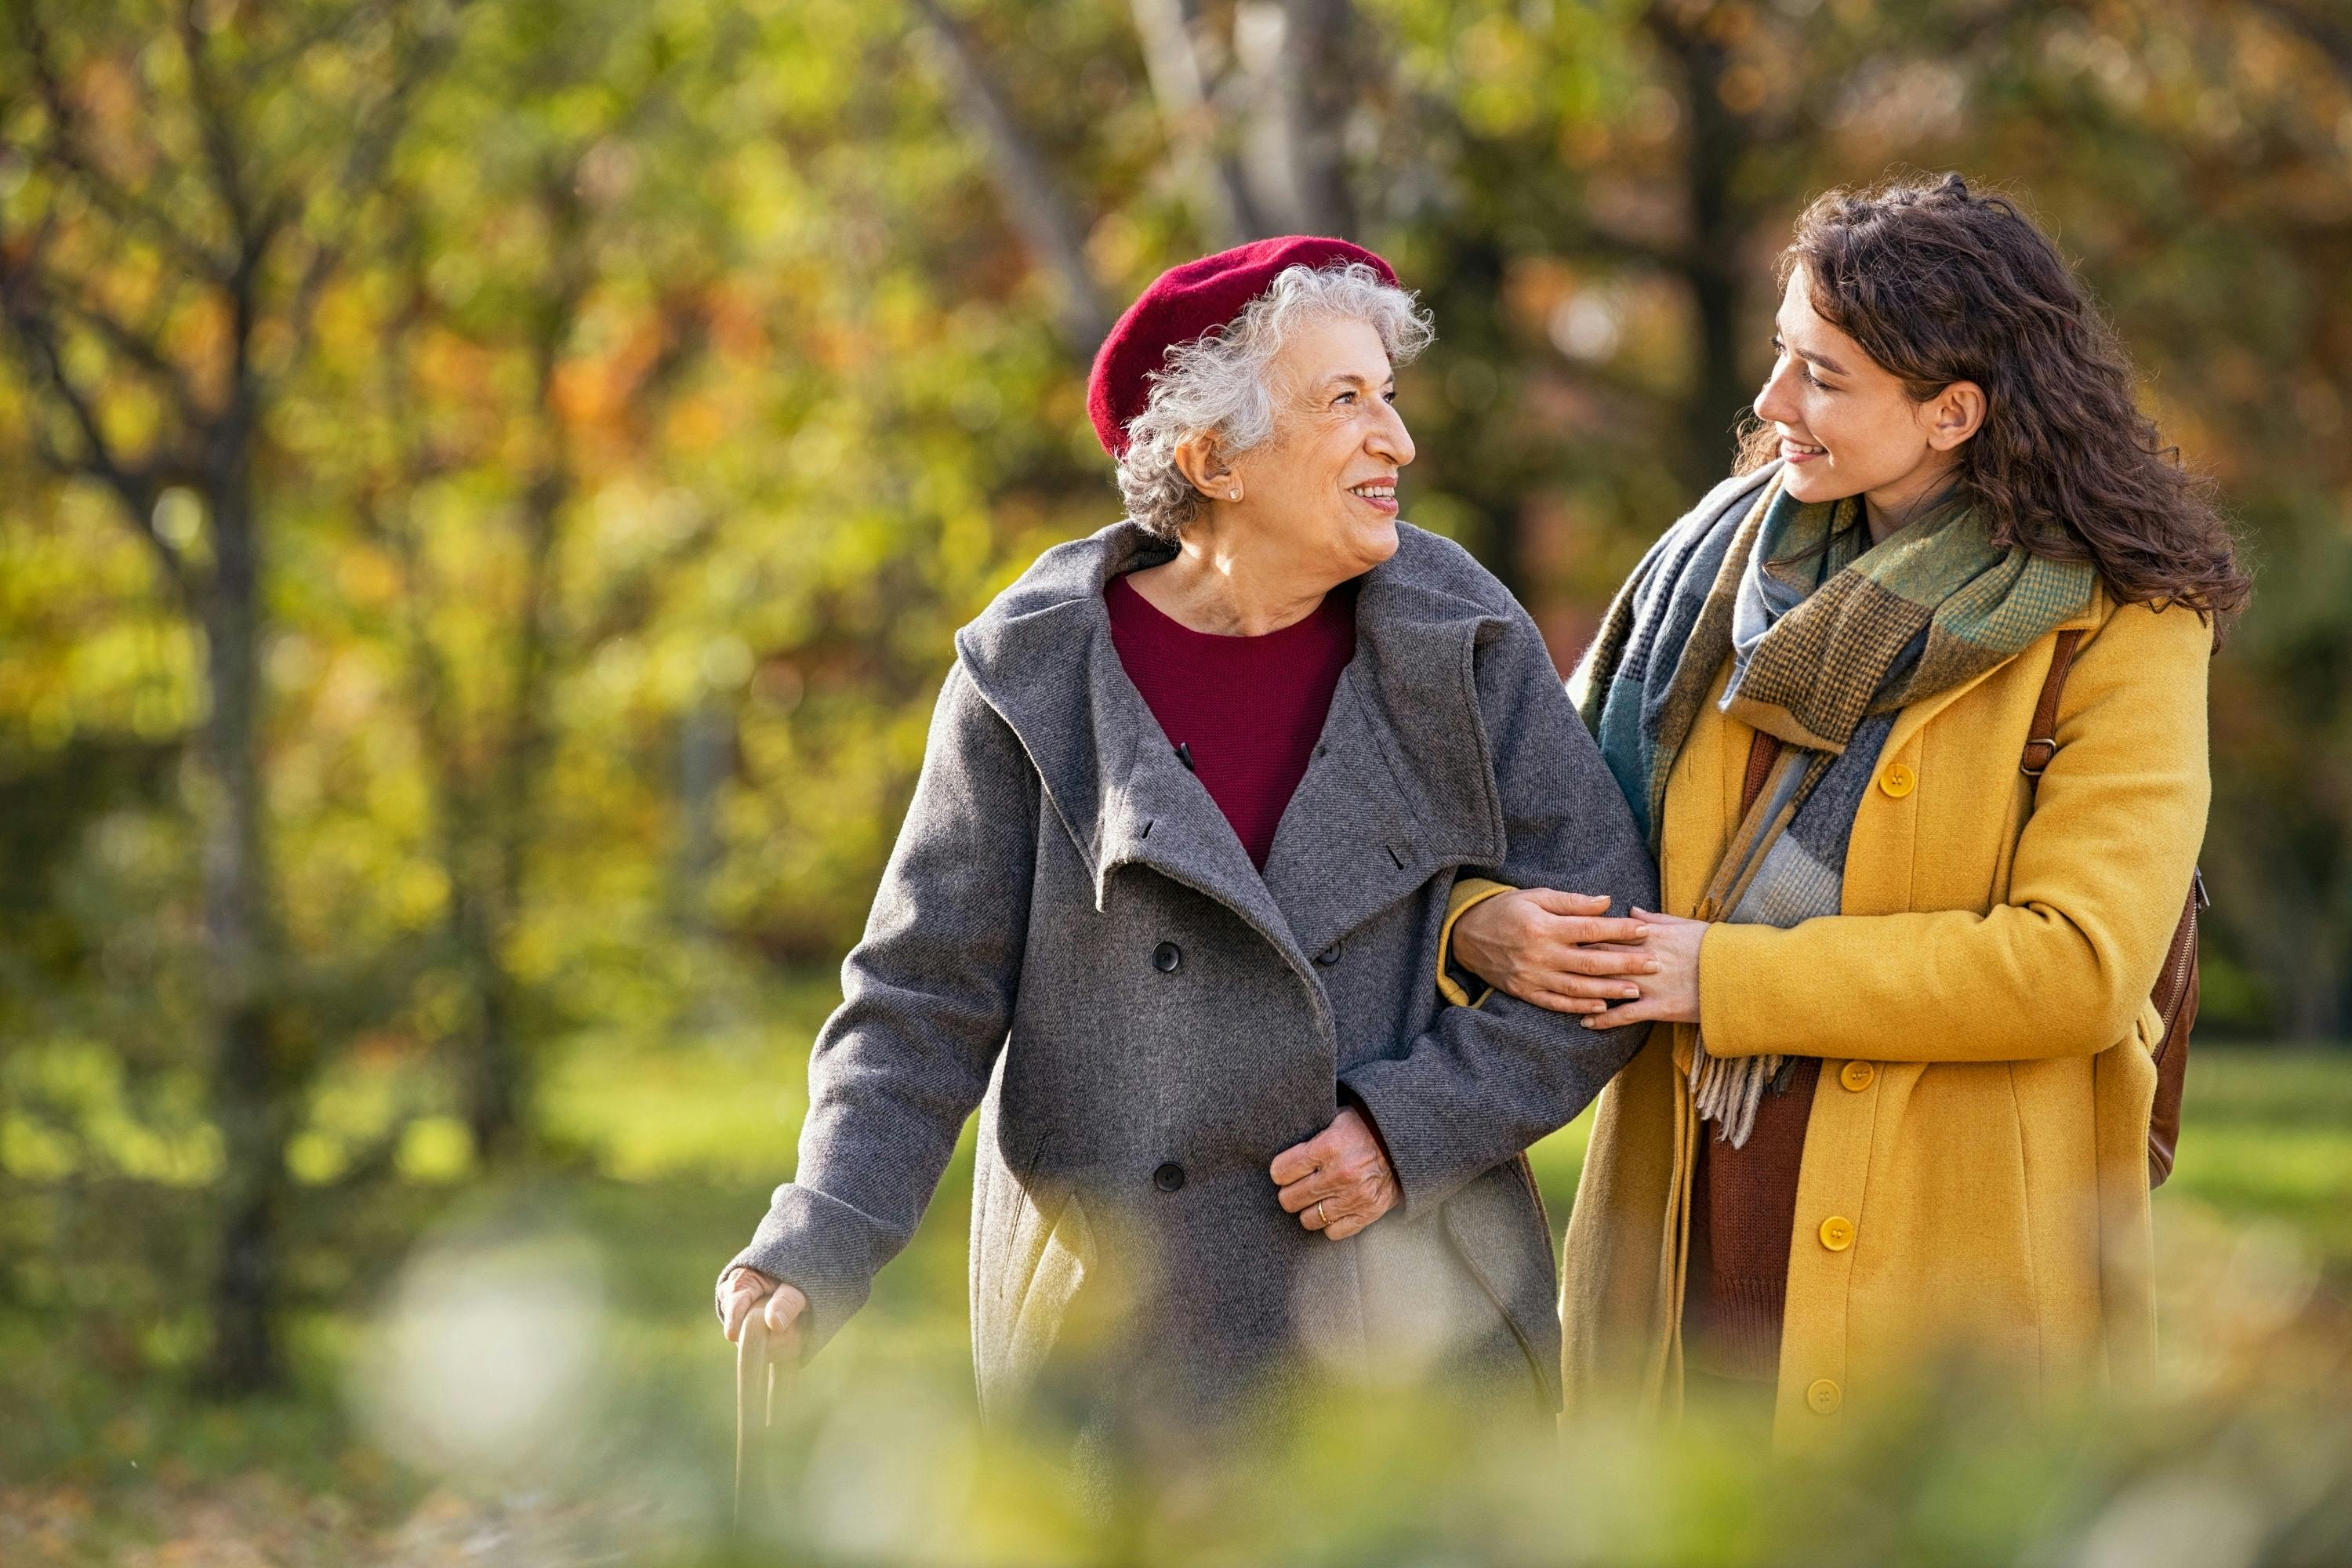 An older woman in a red cap and winter coat is walking through the forest in autumn next to a younger woman in a yellow coat. The two women smile at each other. 